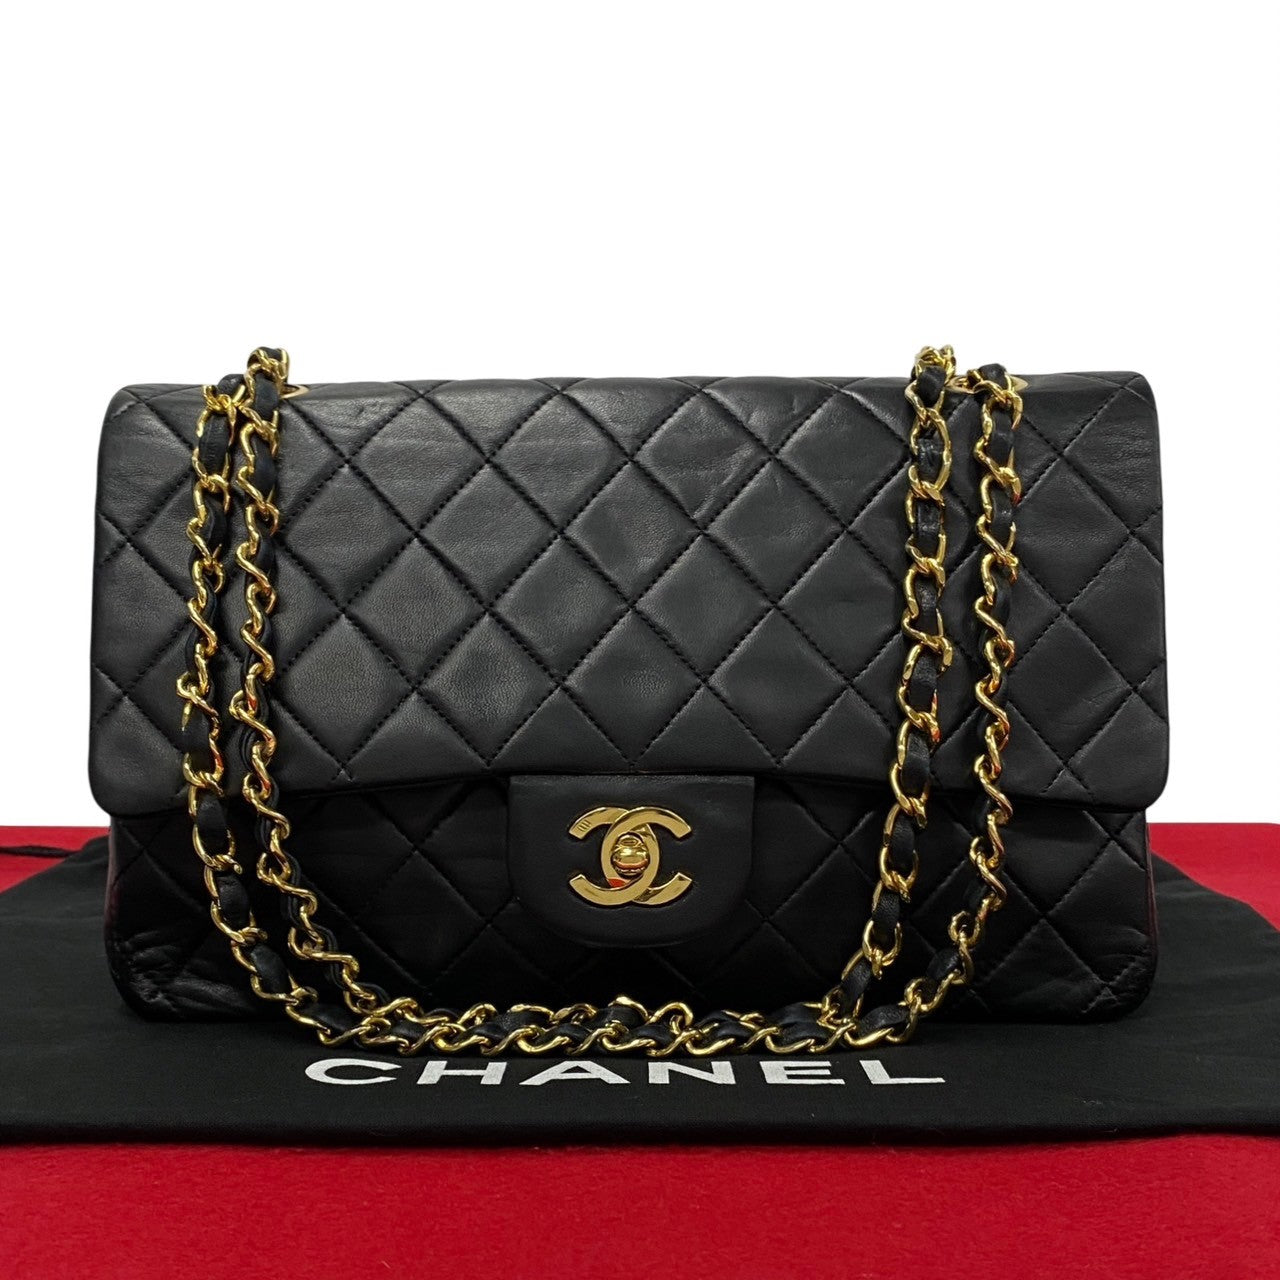 Chanel Medium Classic Double Flap Bag  Leather Crossbody Bag in Good condition